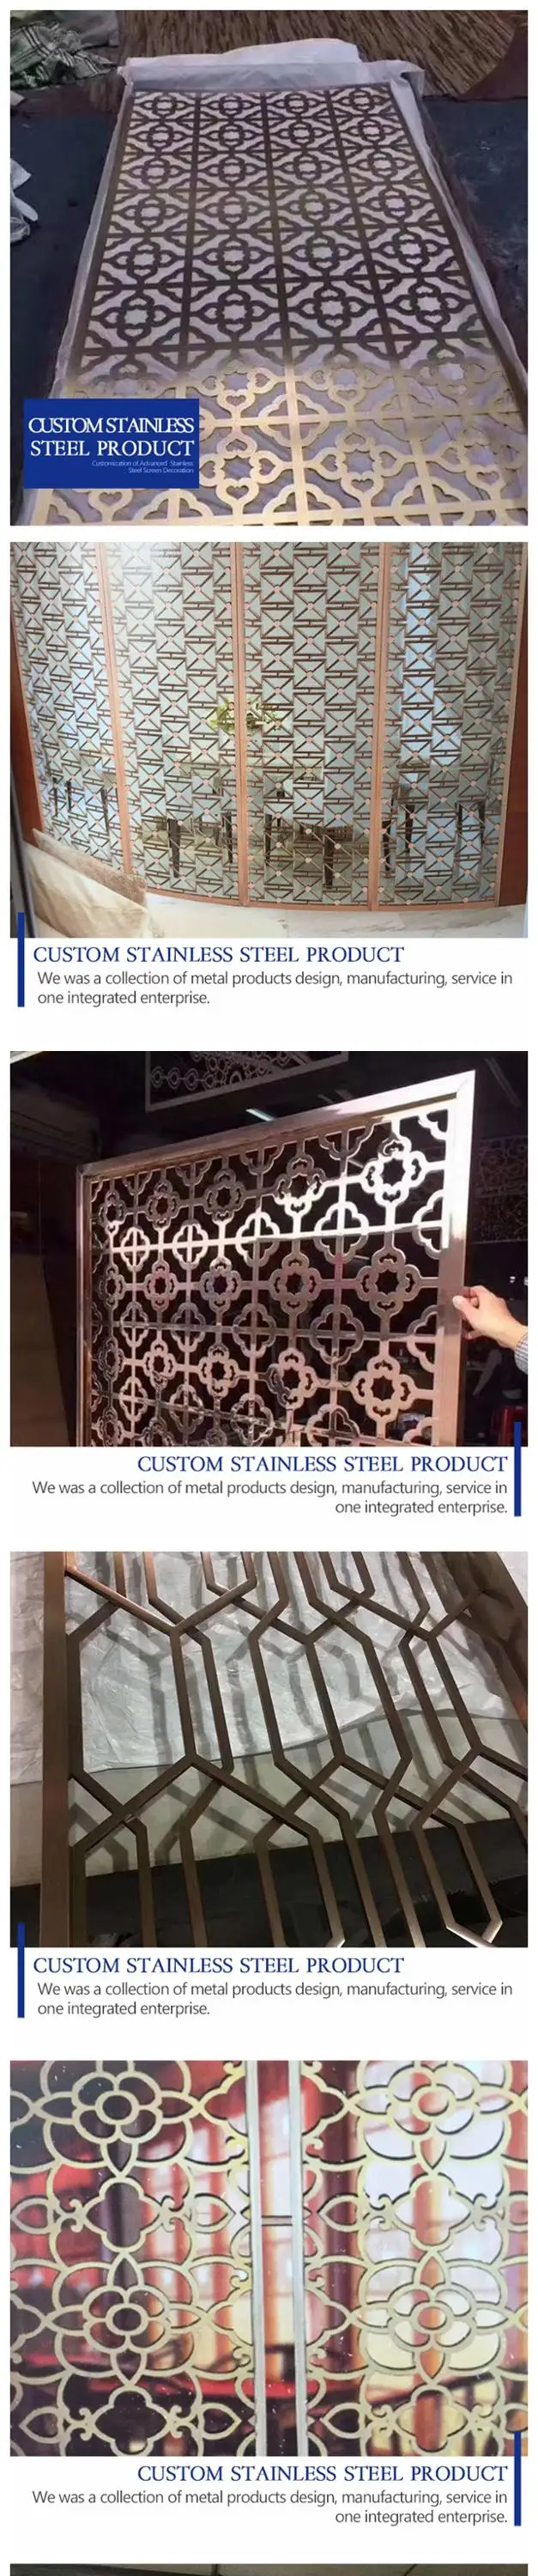 Customized Laser Cut Floor to Ceiling Stainless Steel Divider with Drawing Screen Living Room Restaurant Metal Partition Wall